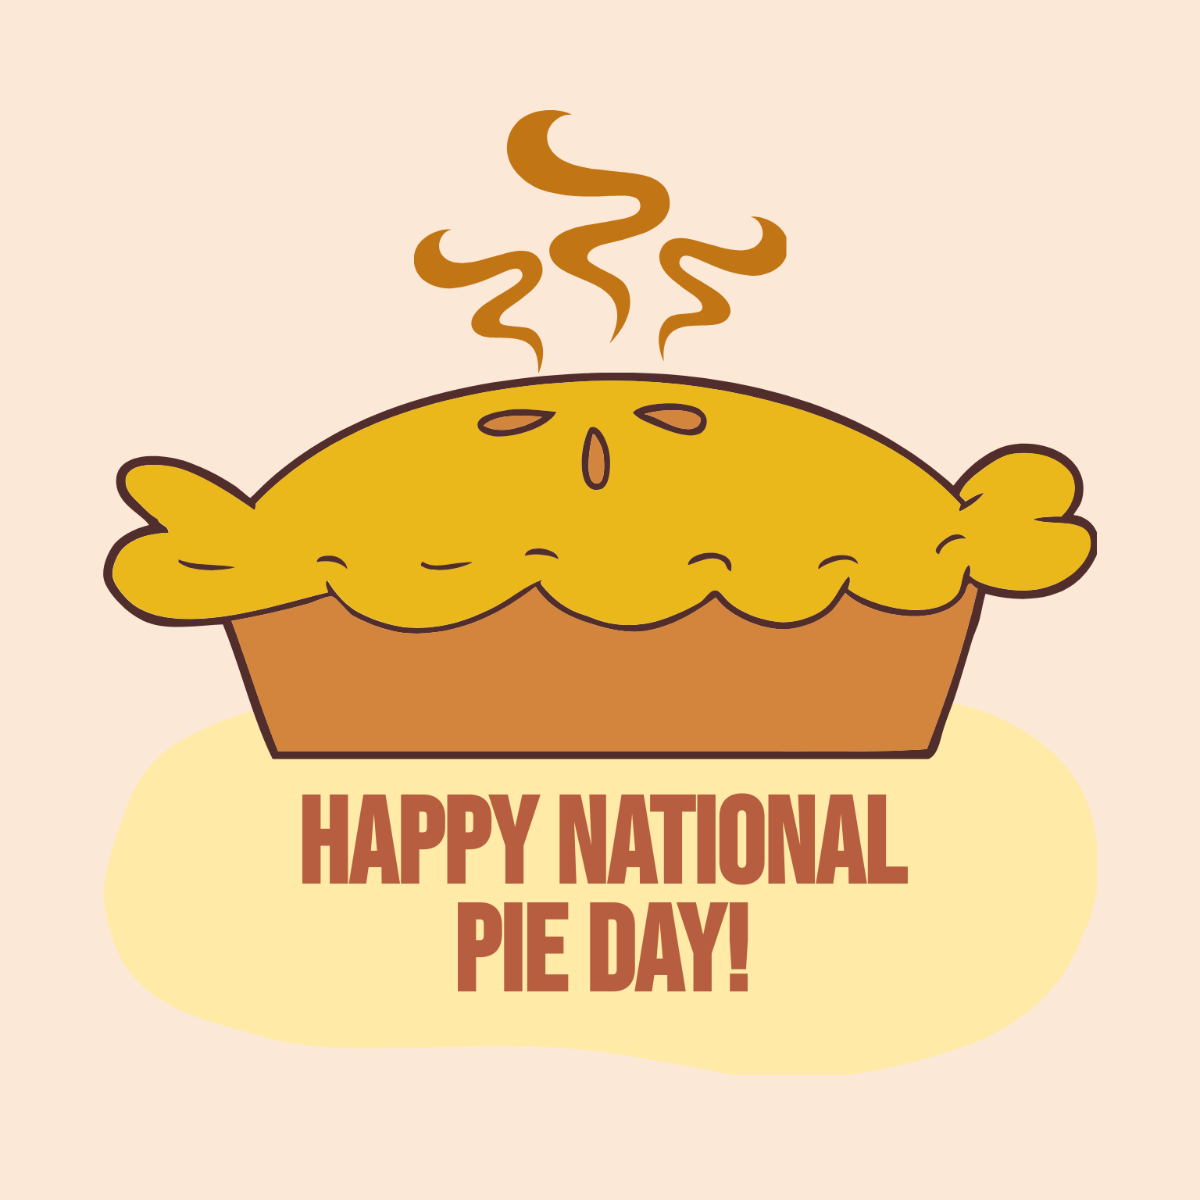 Free Happy National Pie Day Illustration Template